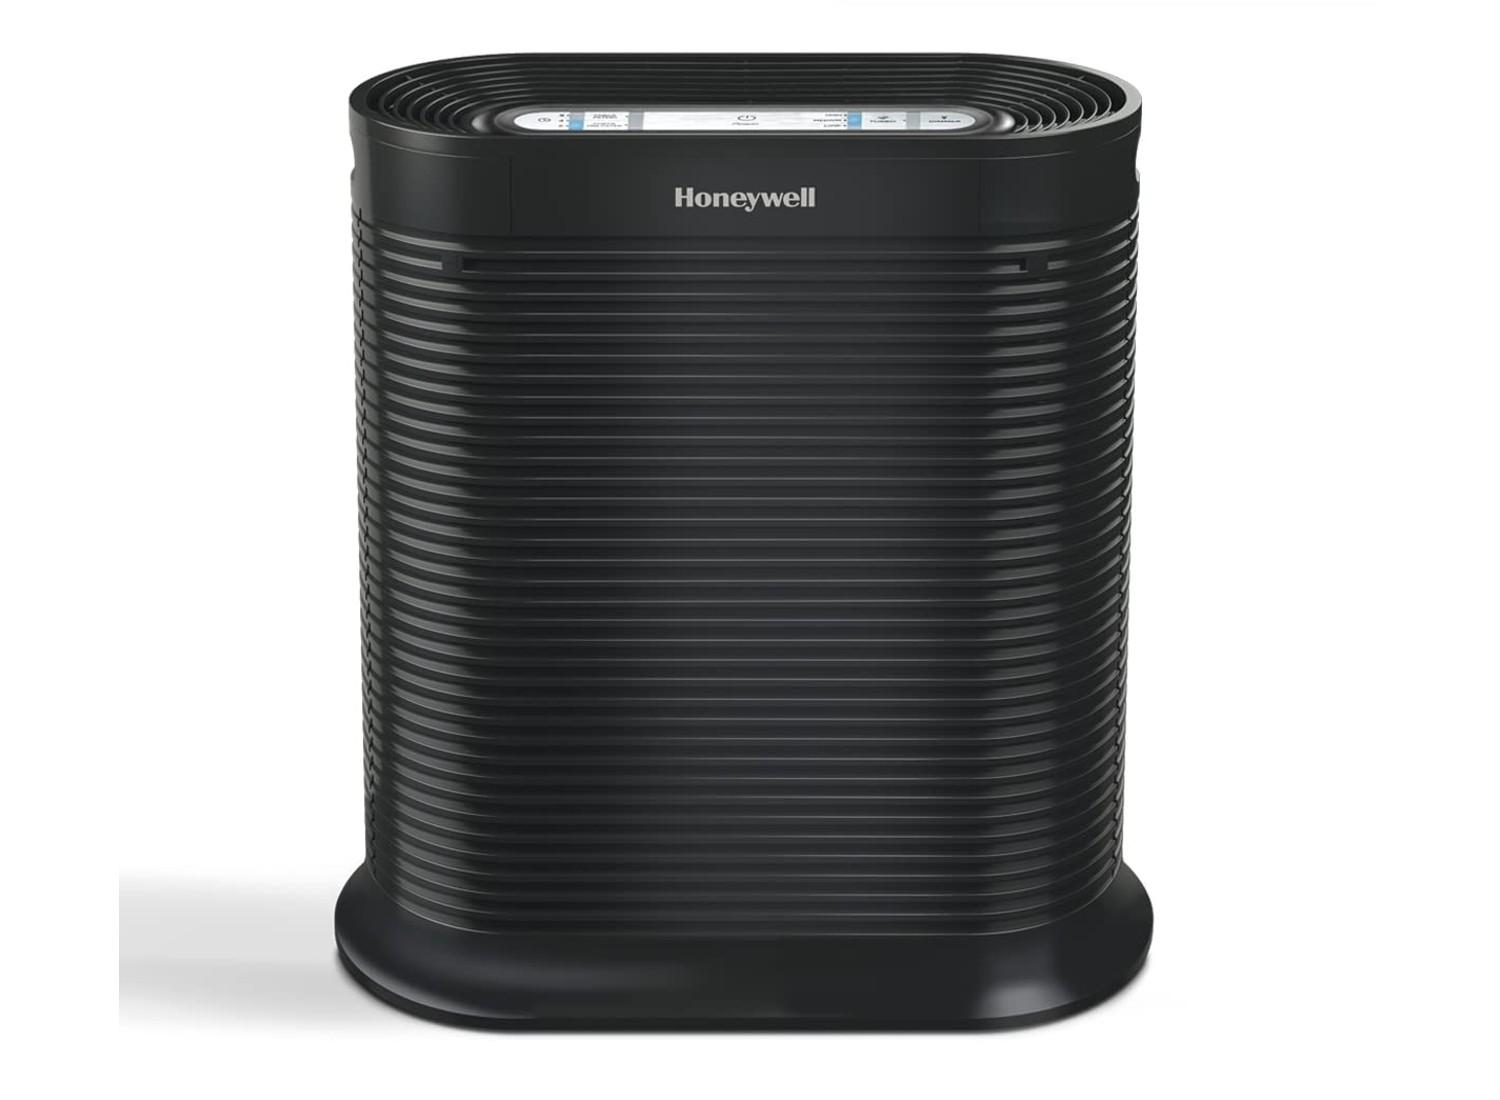 A Honeywell air purifier on a white background.